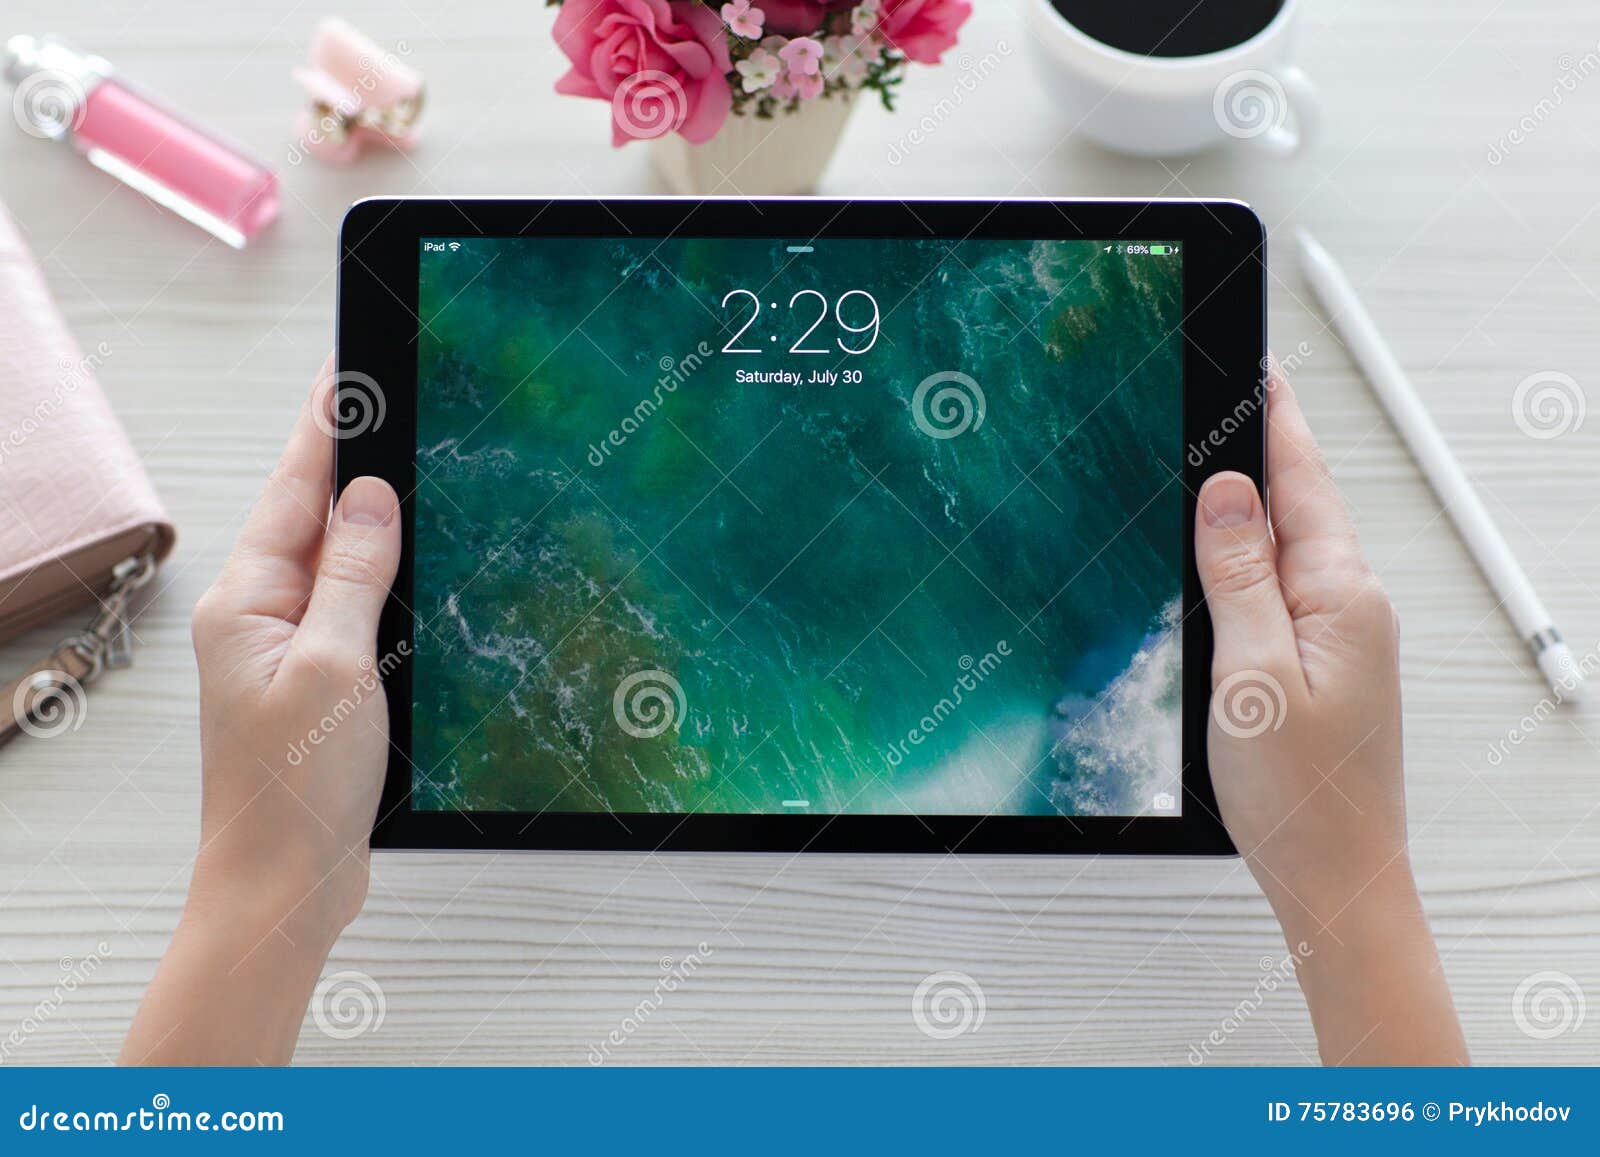 Woman Holding IPad Pro Space Gray with Wallpaper IOS 10 Editorial Photo -  Image of finger, home: 75783696